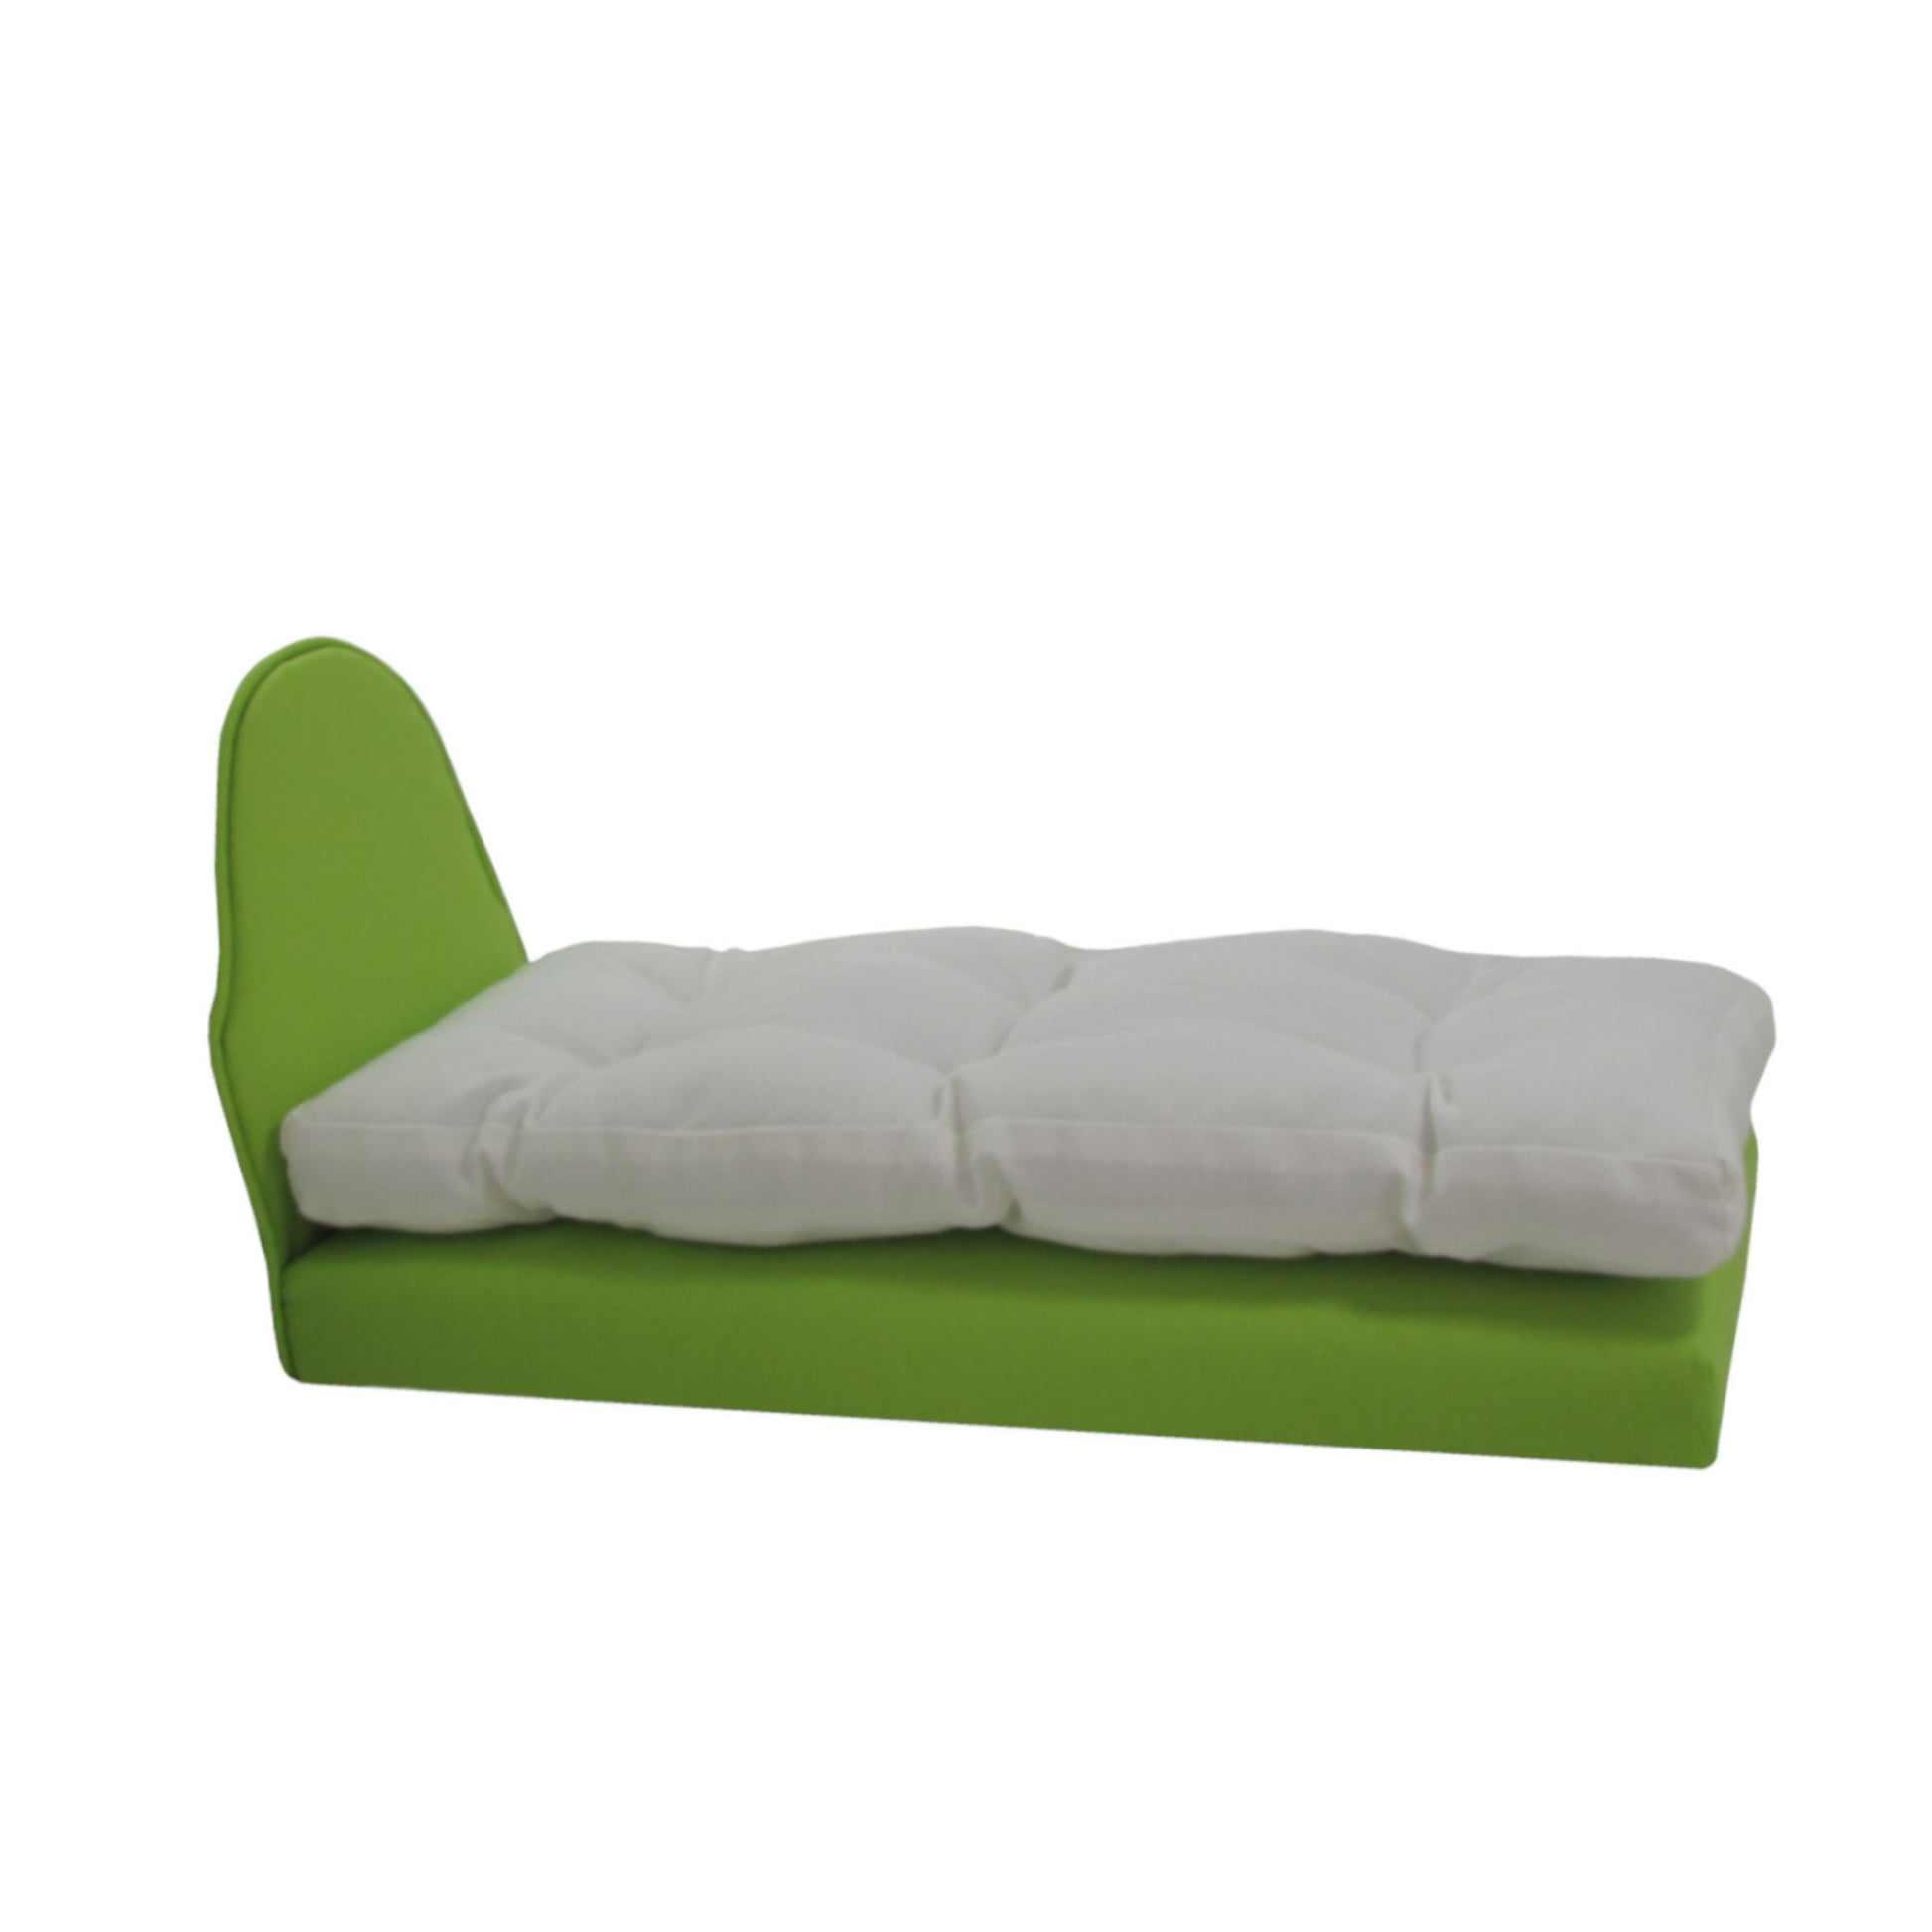 Upholstered Light Green Doll Bed for 11 1/2-inch and 12-inch dolls